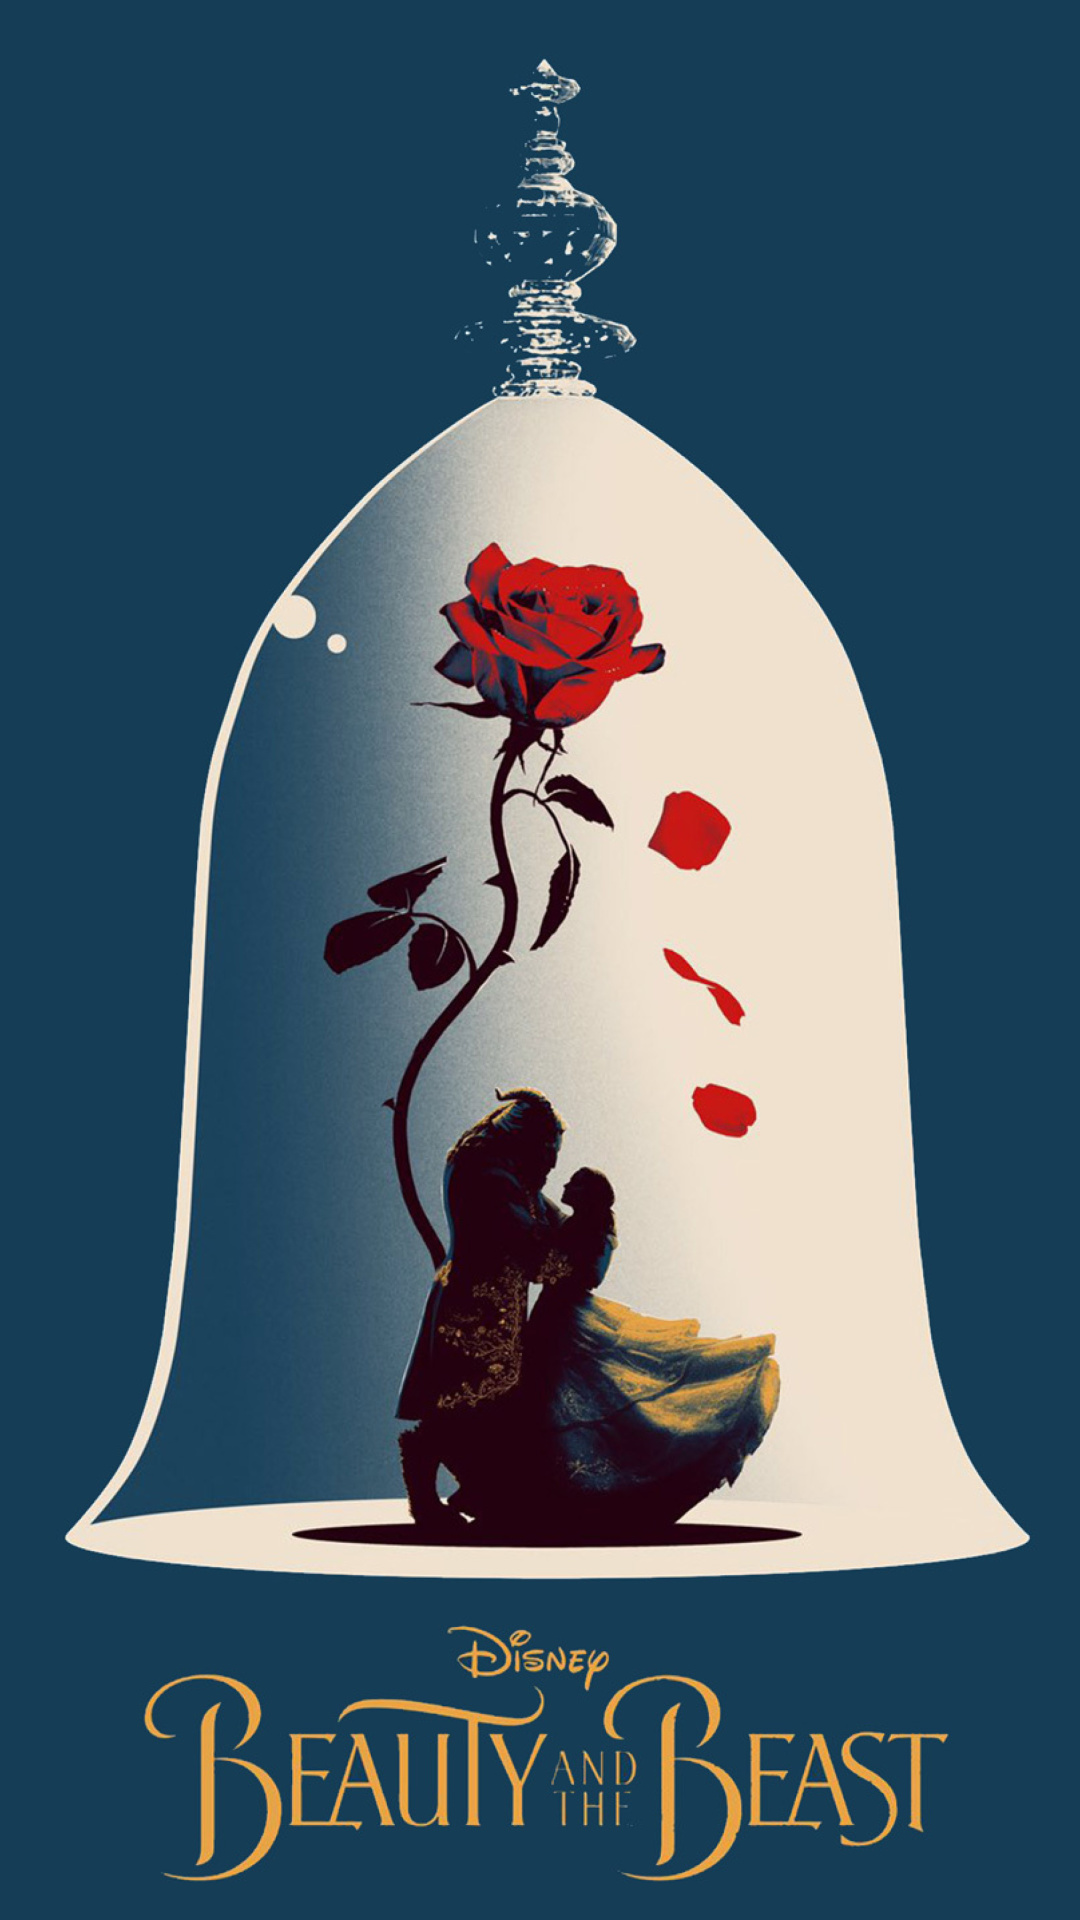 Beauty and the Beast Poster wallpaper 1080x1920